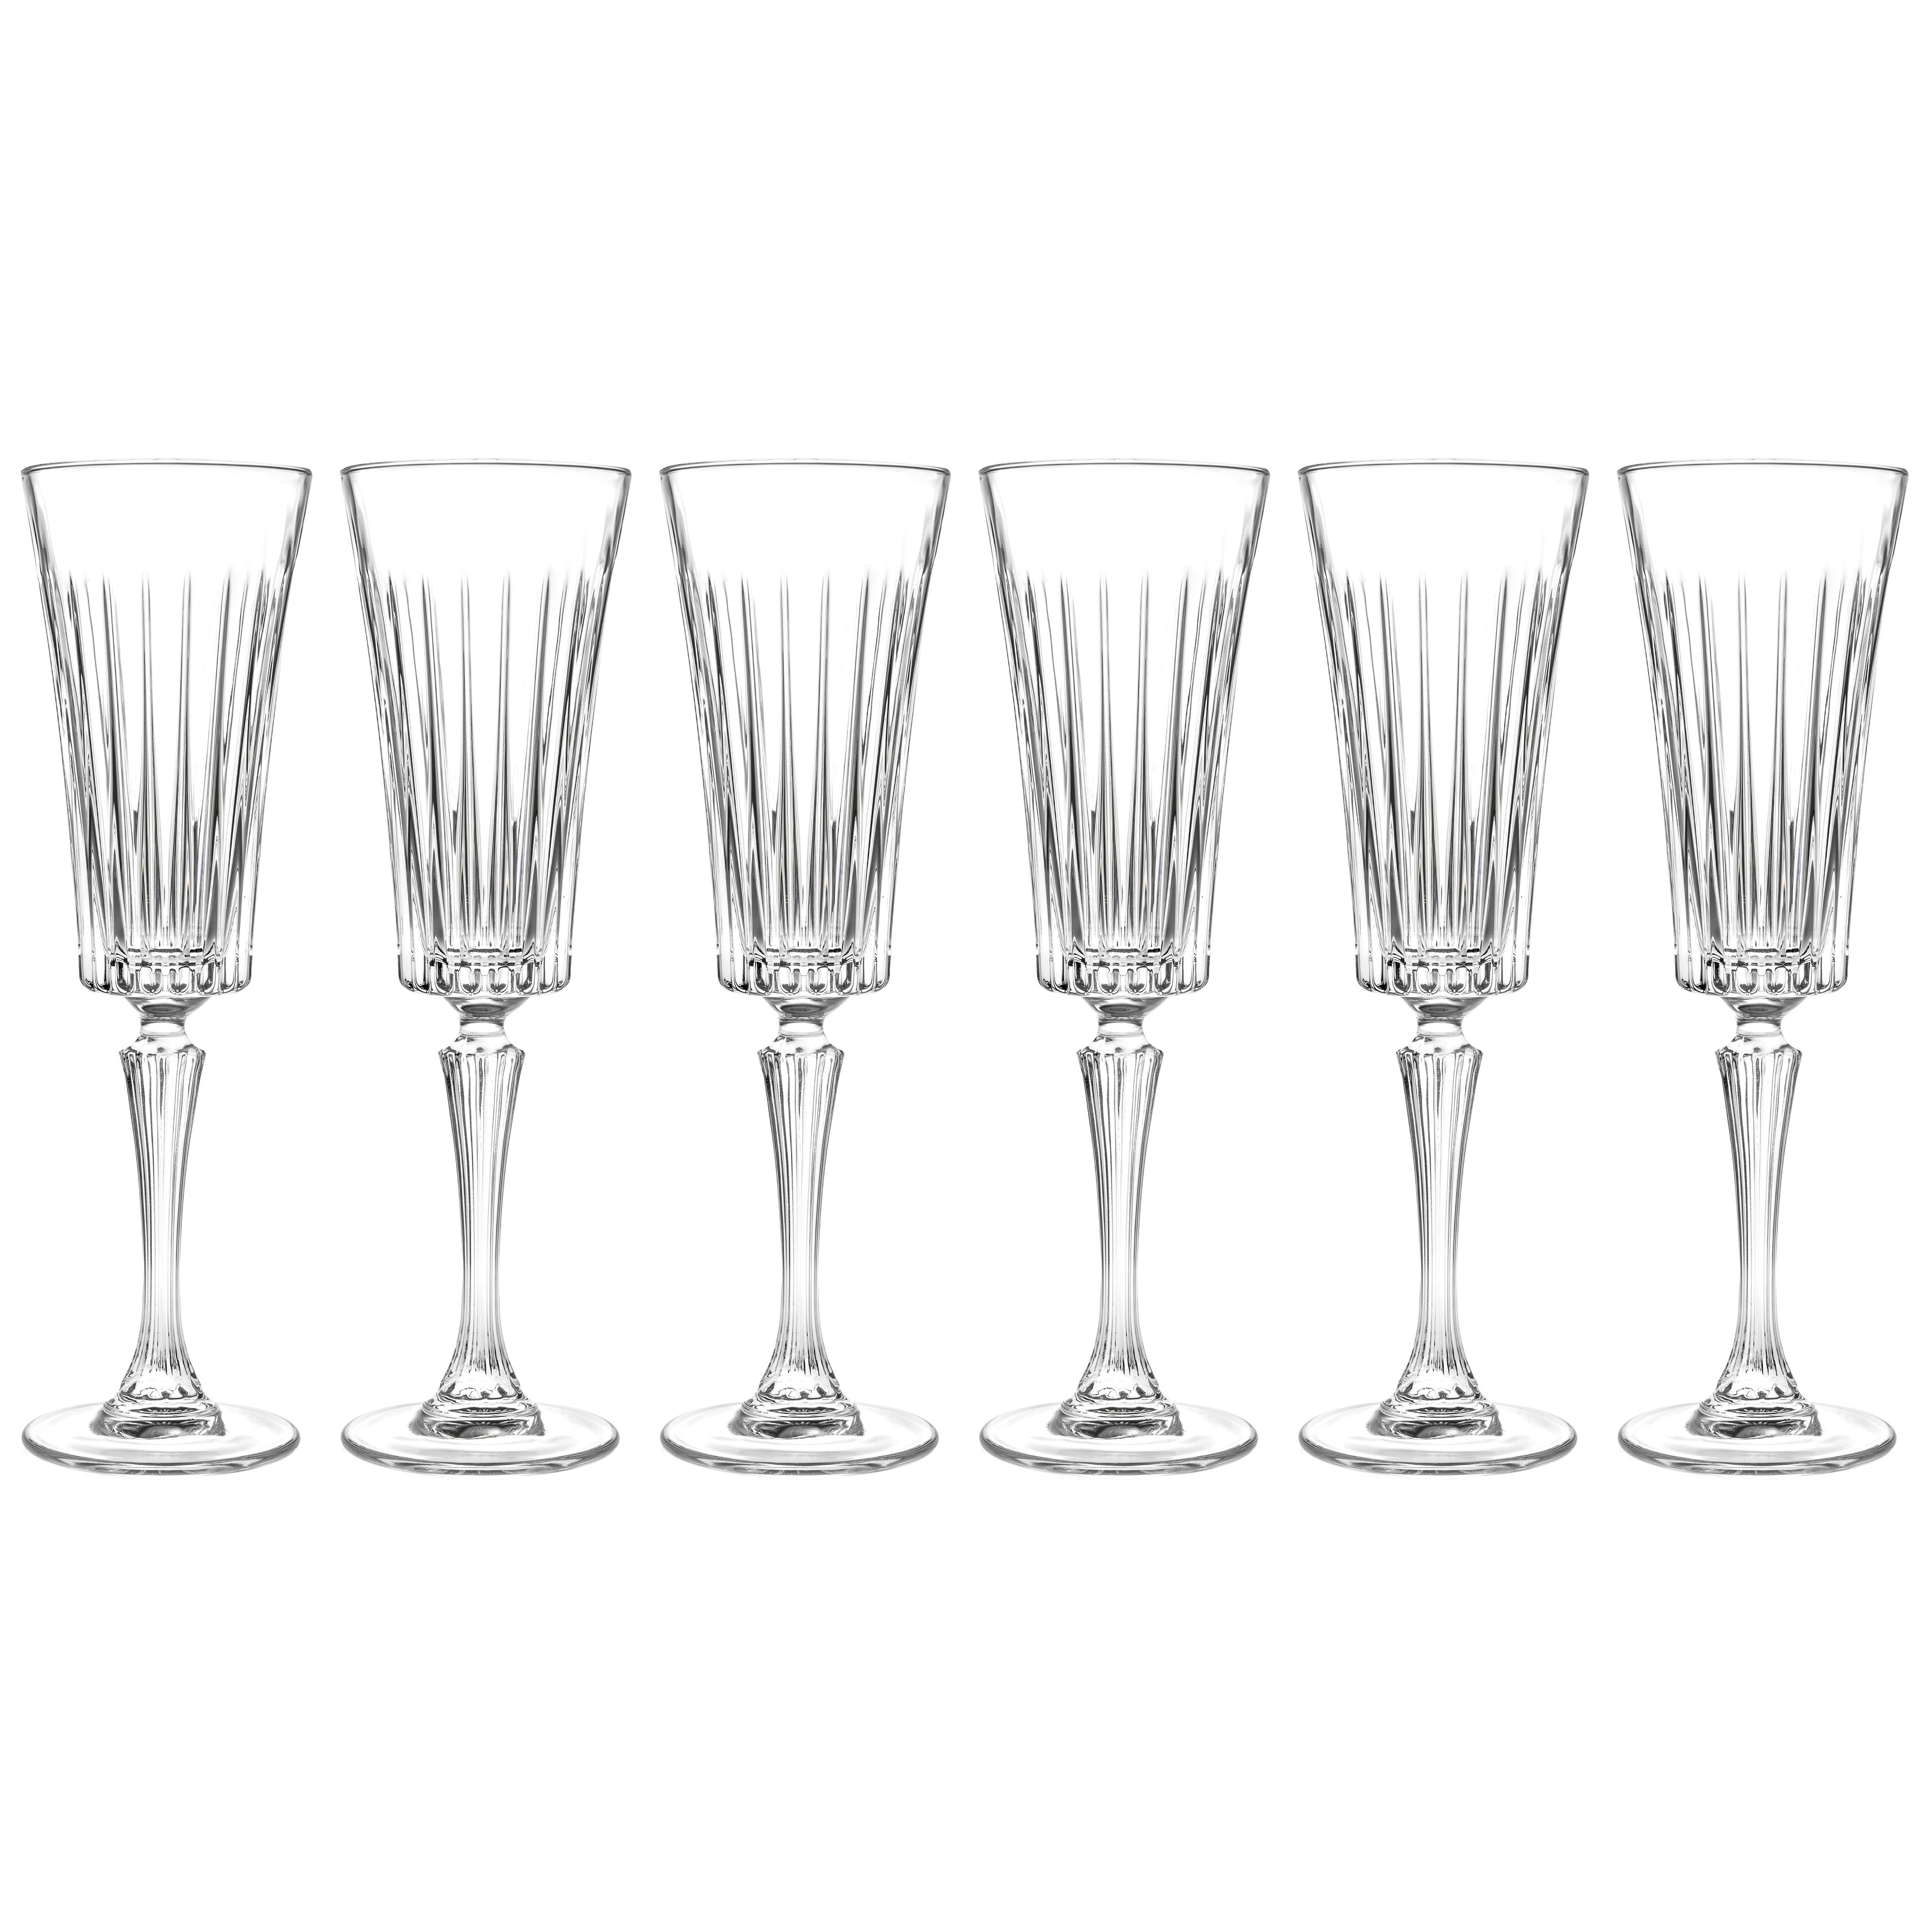 https://ak1.ostkcdn.com/images/products/is/images/direct/b76e24d10d52066e6aad34d5f8adf73805257fcd/Majestic-Gifts-Inc.-Wedding-Champagne-Flute-Glasses---7-oz%2C-Set-6.jpg